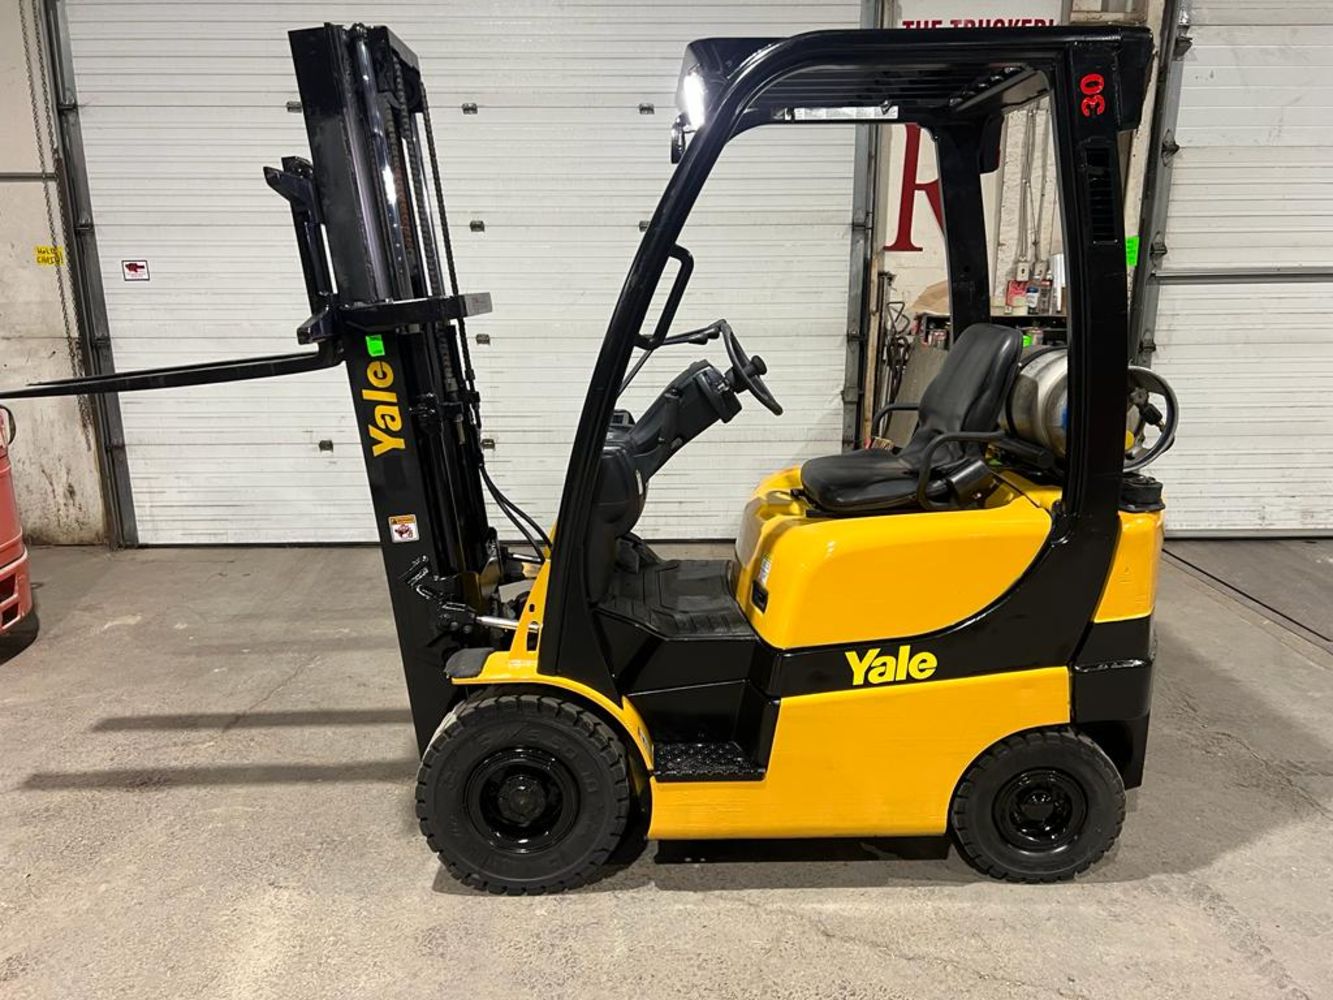 Auction of Mechanical & Welding Company – MINT Forklifts, Mfg, Cabinets, Fab Equipment, Hoists & More ***NEW LOTS ADDED DAILY***